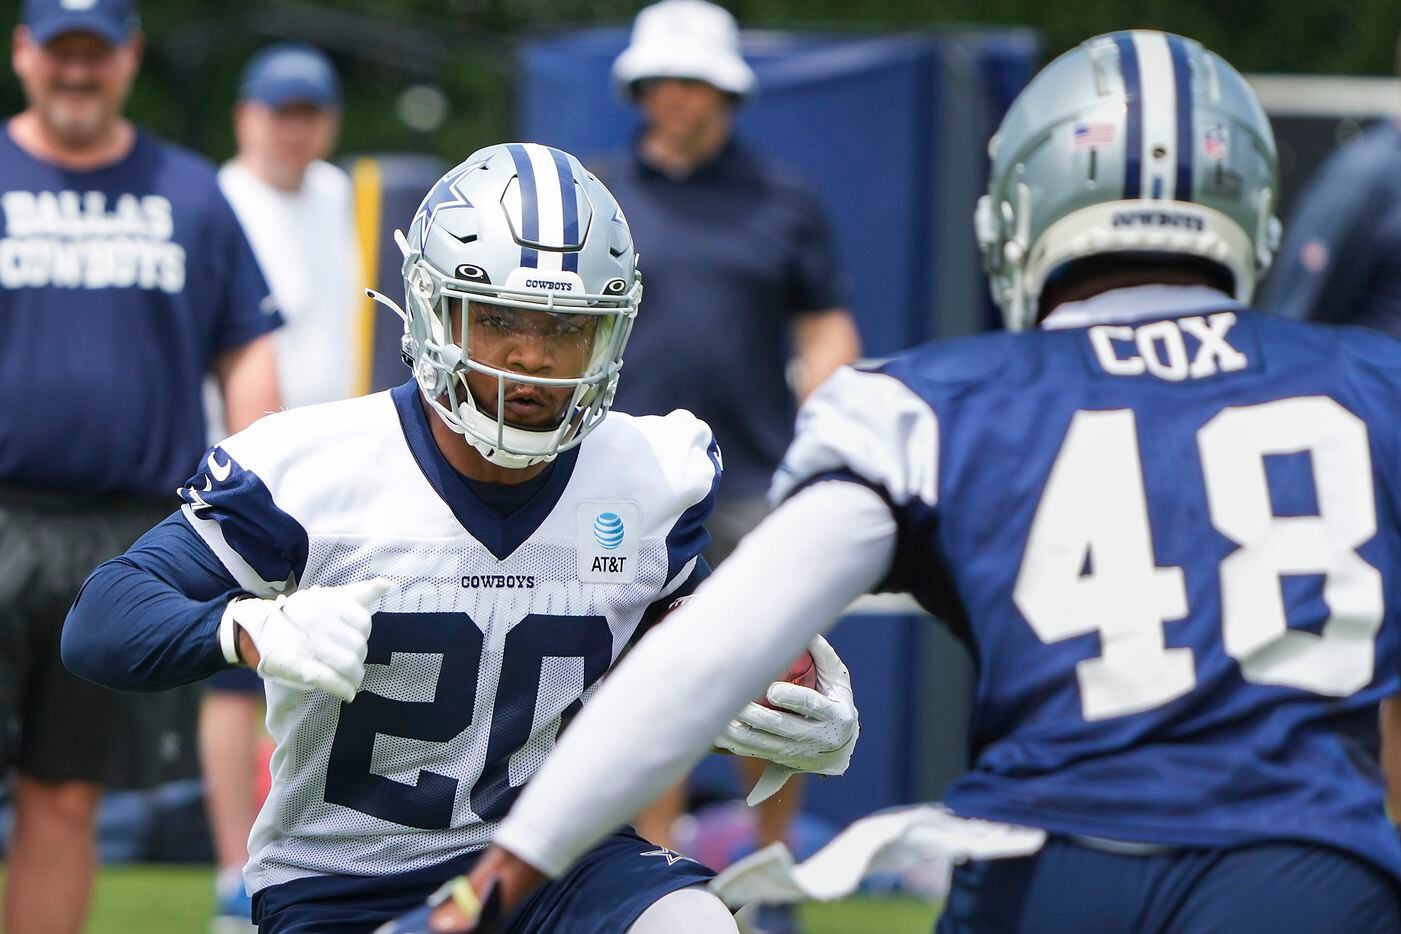 Dallas Cowboys running back Tony Pollard (20) works against linebacker Jabril Cox (48) during a minicamp practice at The Star on Tuesday, June 8, 2021, in Frisco. (Smiley N. Pool/The Dallas Morning News)